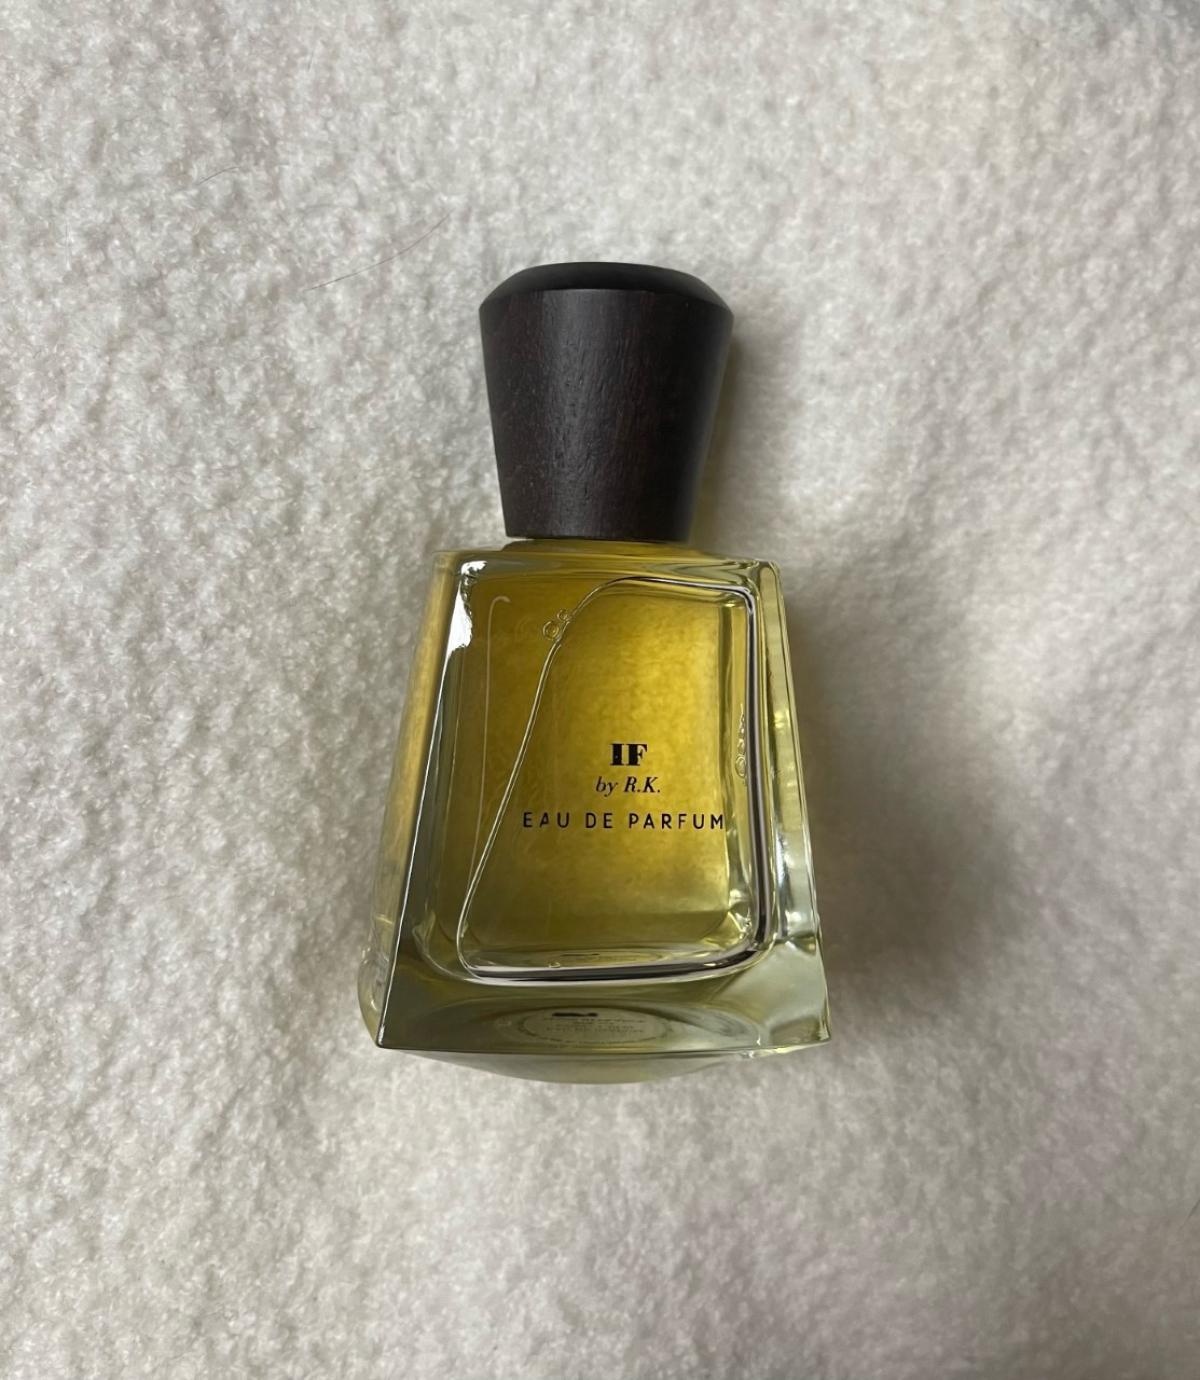 IF by R.K. Frapin perfume - a fragrance for women and men 2019